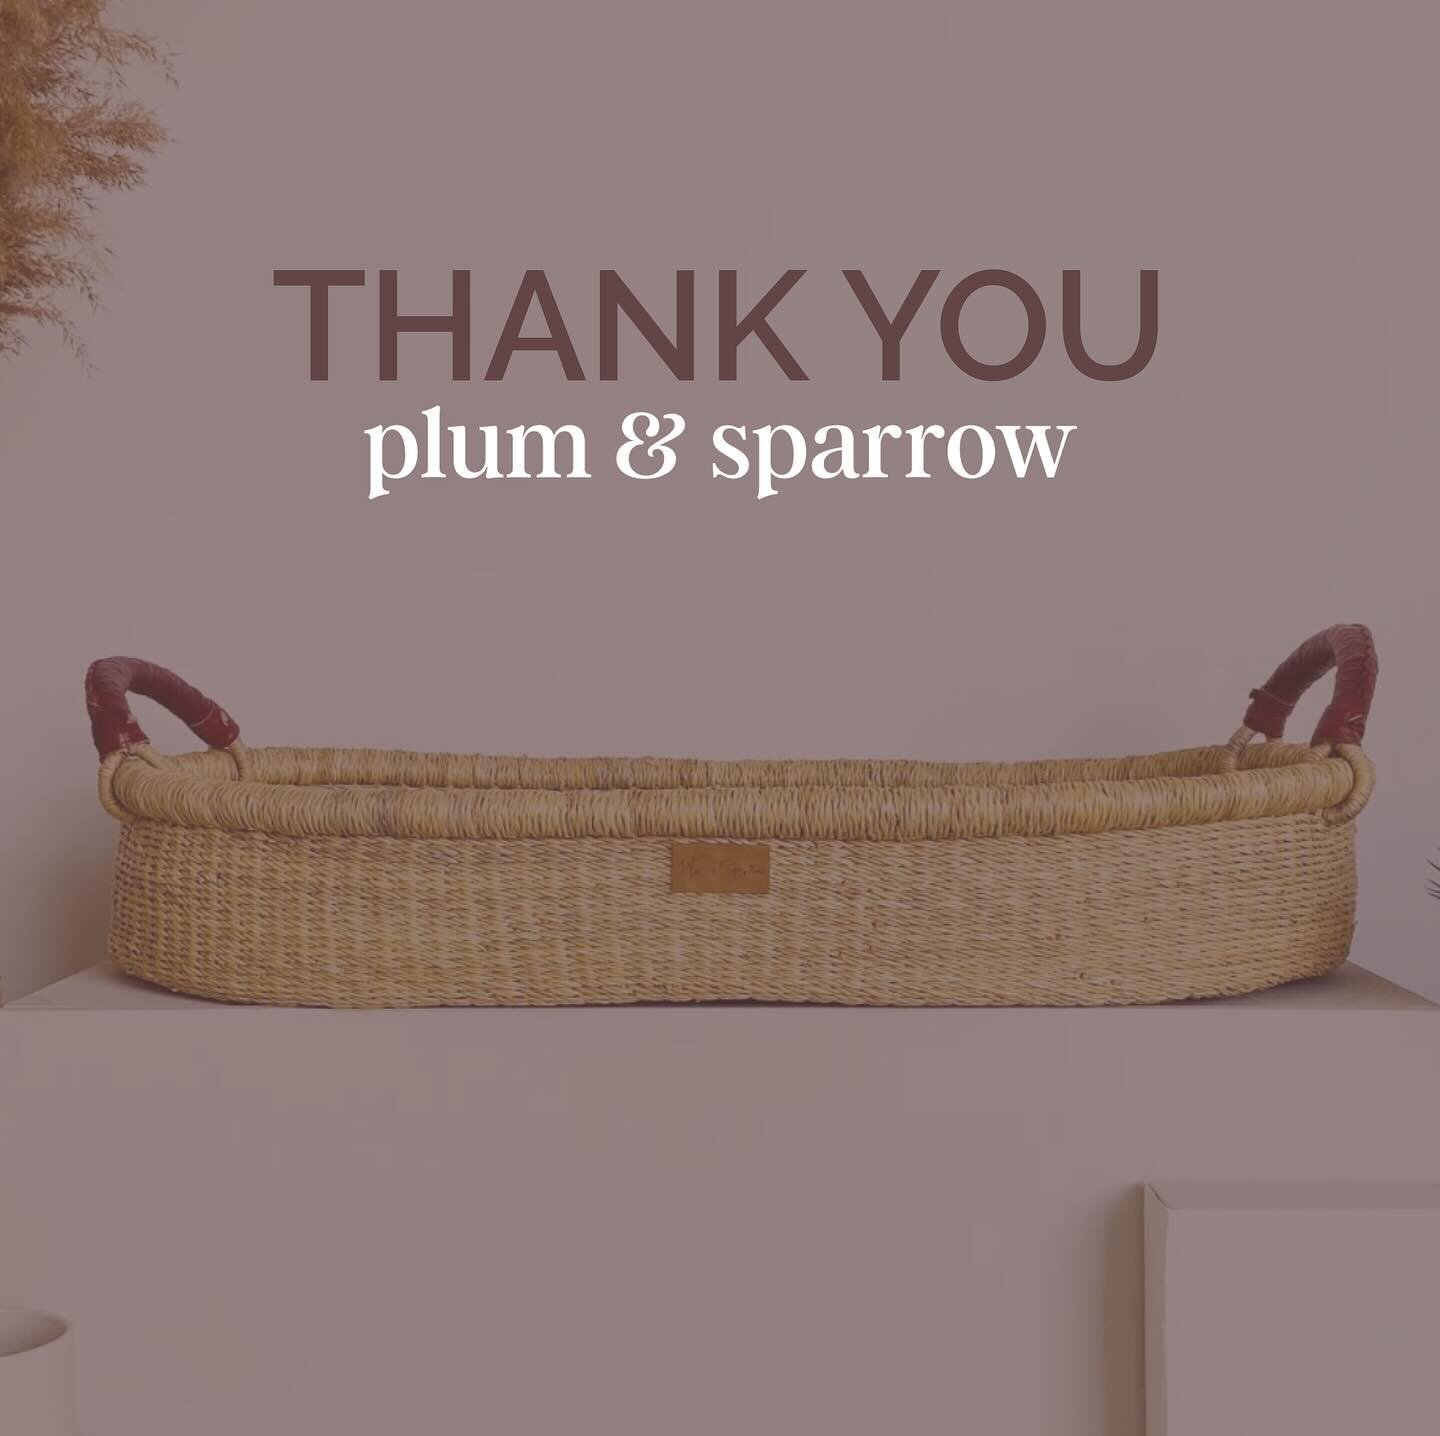 Thank you so much to @plumandsparrow for committing to donating items to our #nicunurseryproject nurseries! 🫶 Plum &amp; Sparrow makes heirloom quality products &mdash; their baskets are hand-woven in Western Africa by weavers that have been practic